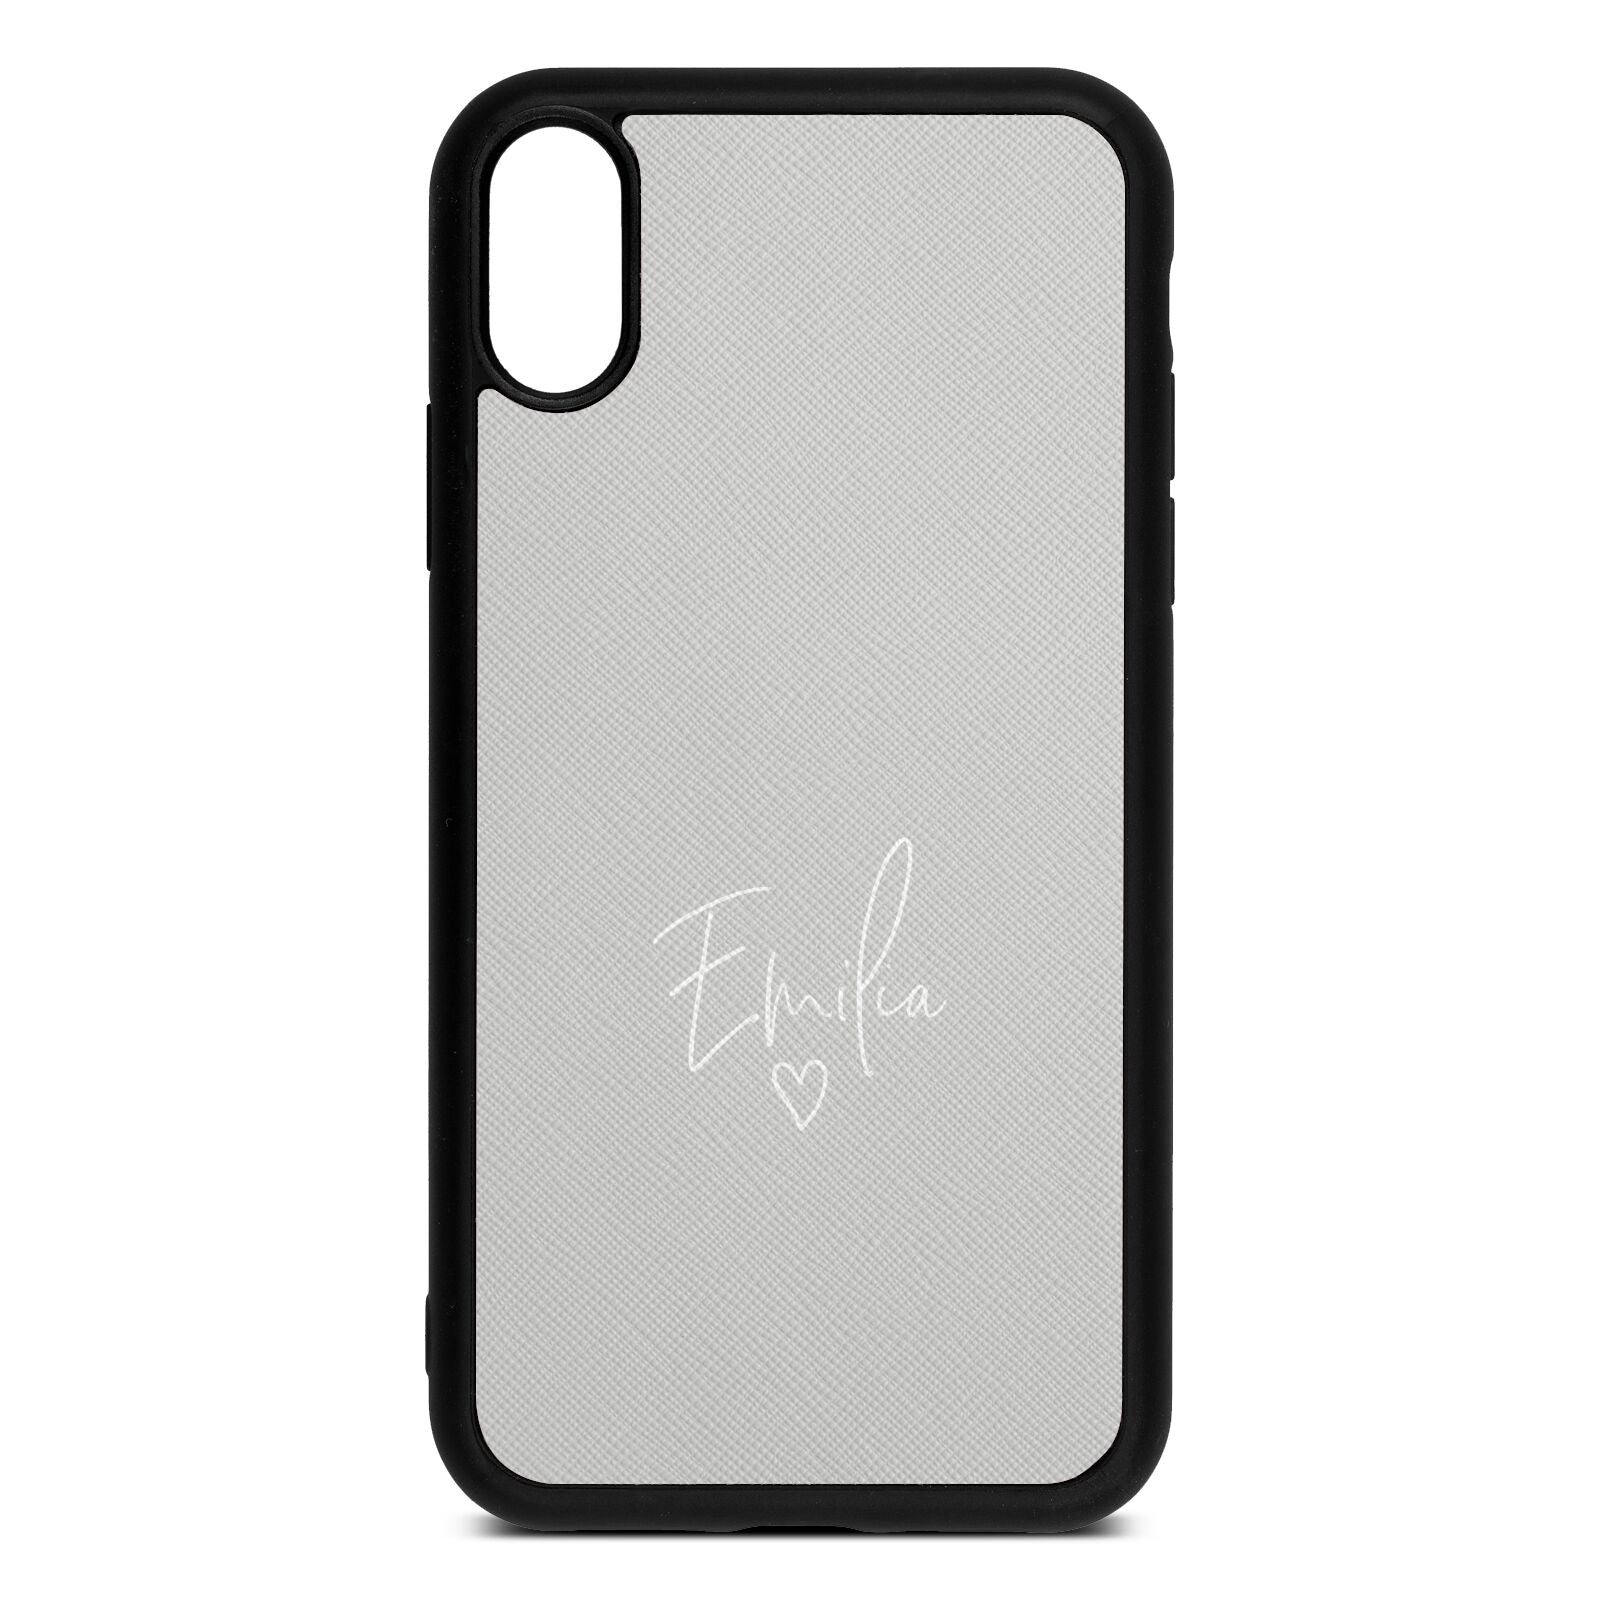 White Handwritten Name Transparent Silver Saffiano Leather iPhone Xr Case